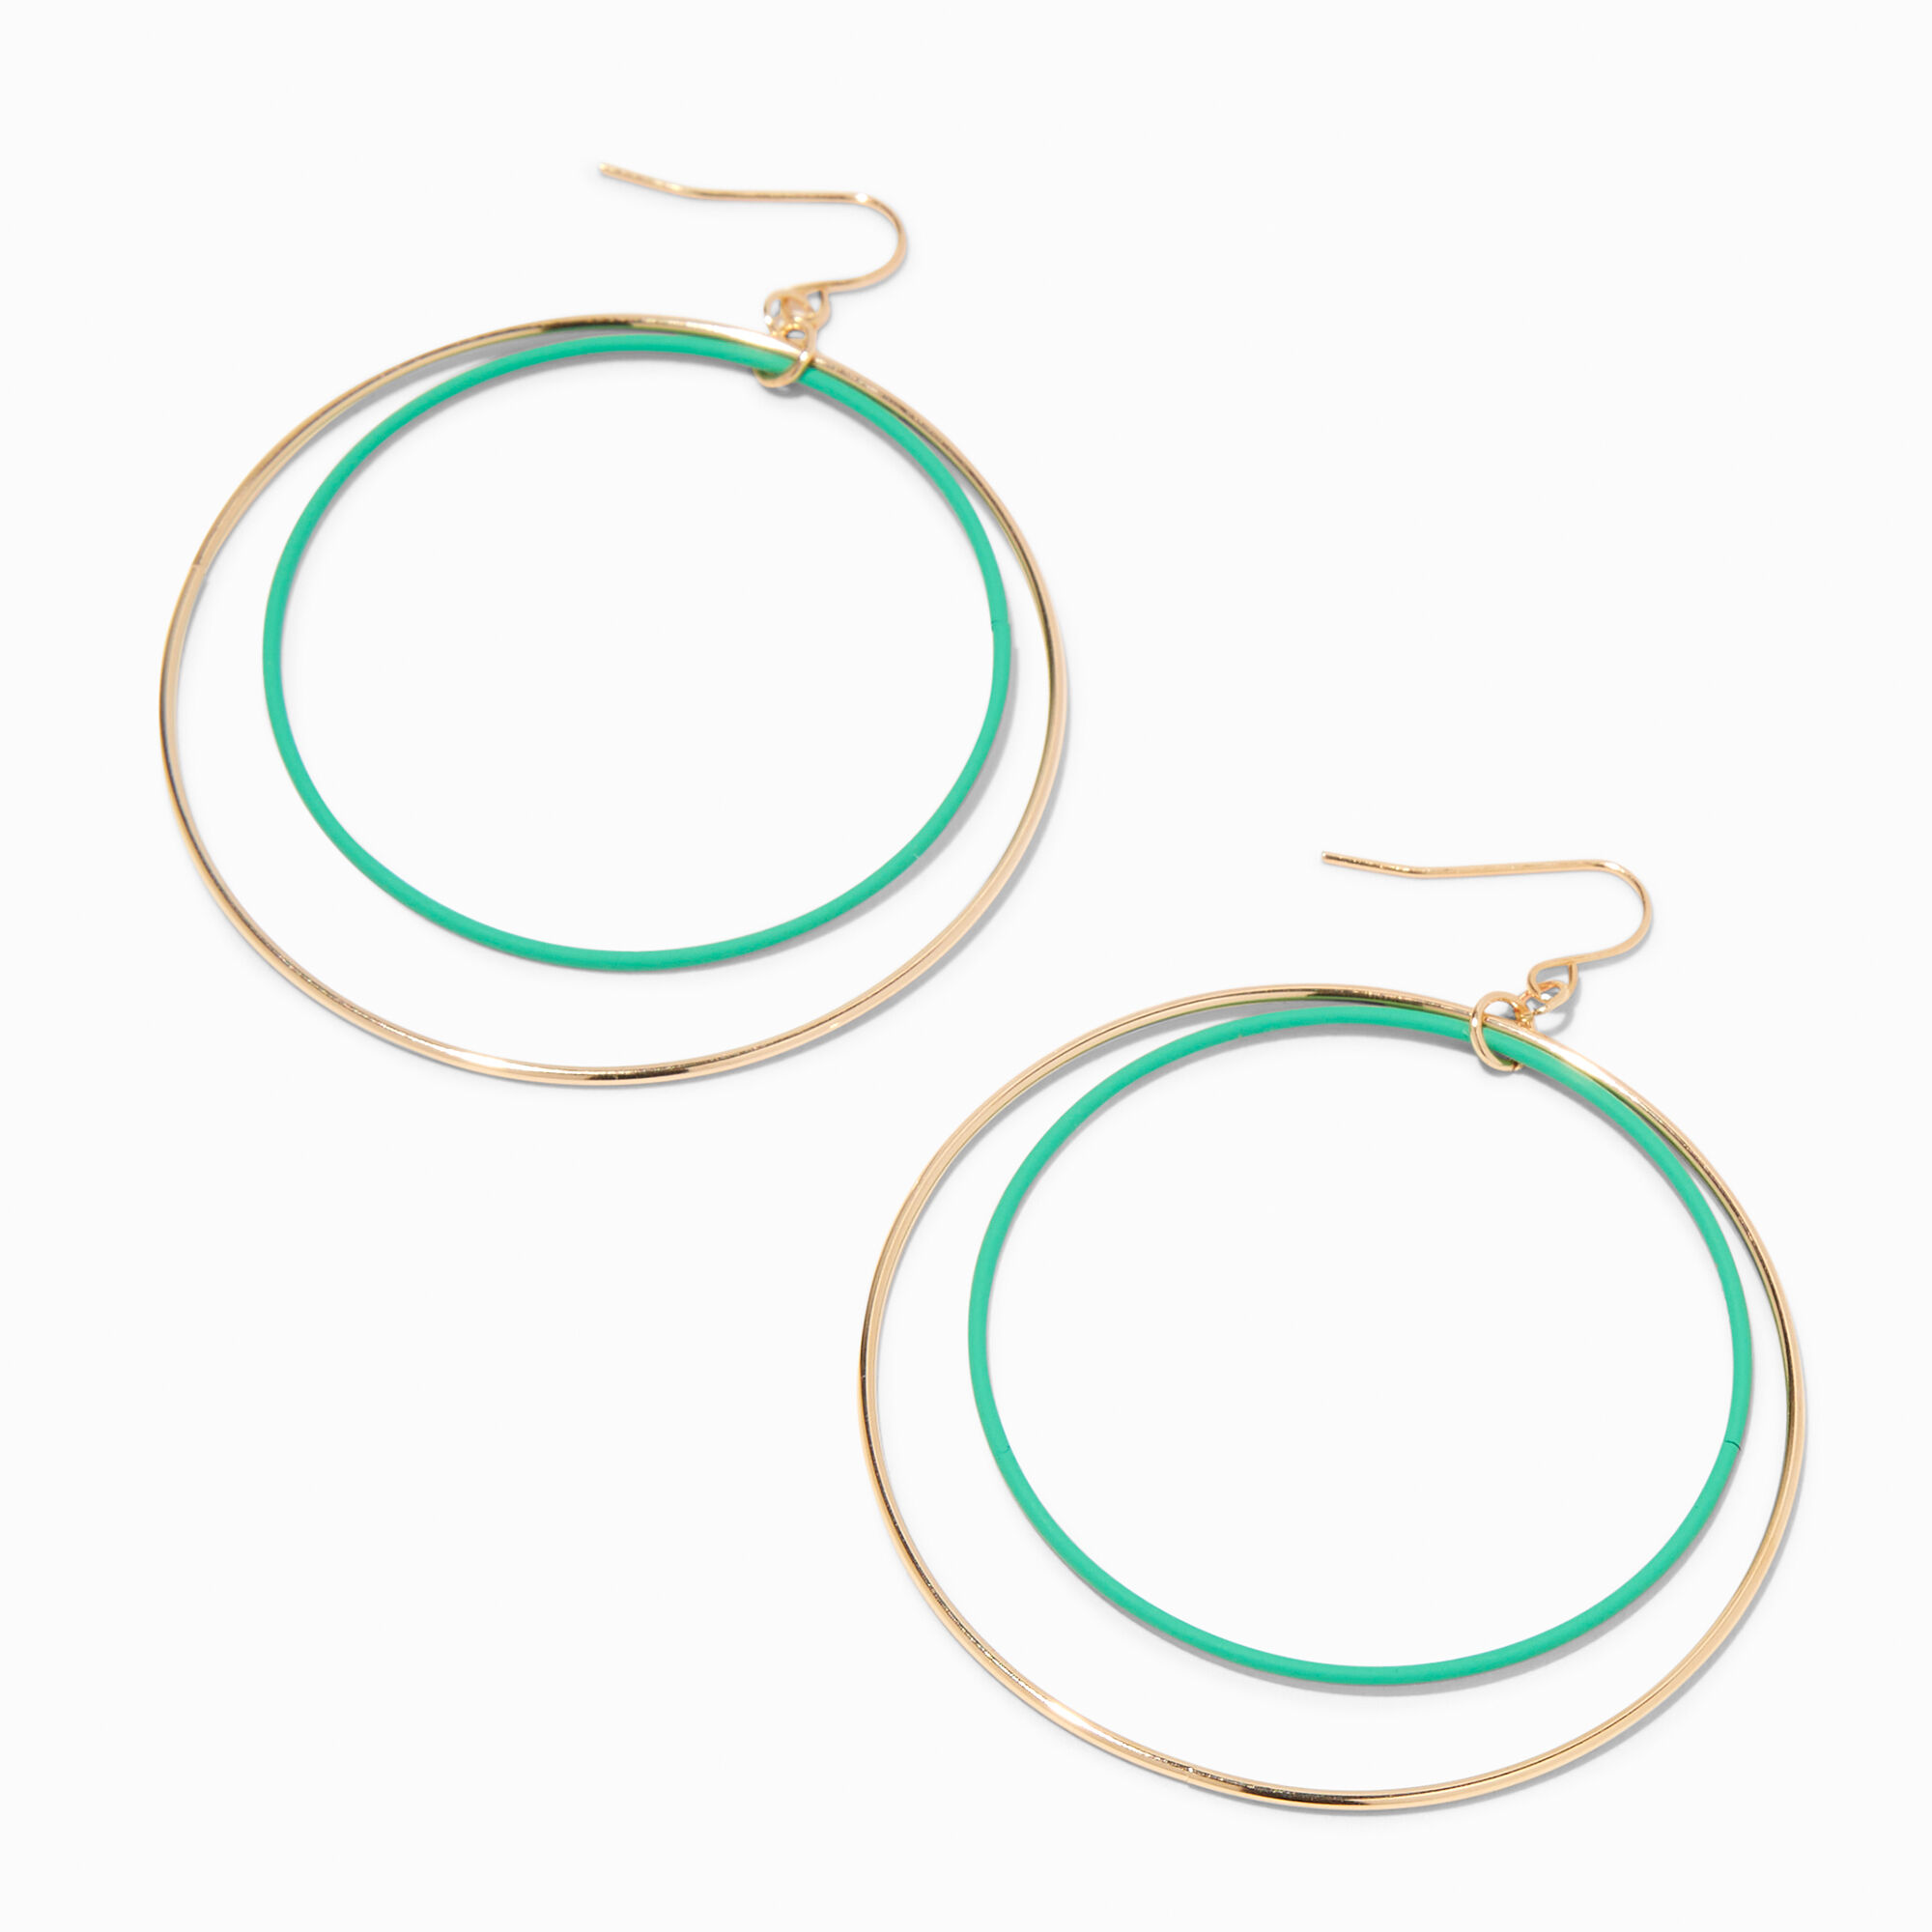 View Claires Gold 3 Enamel Double Ring Hoop Drop Earrings Green information